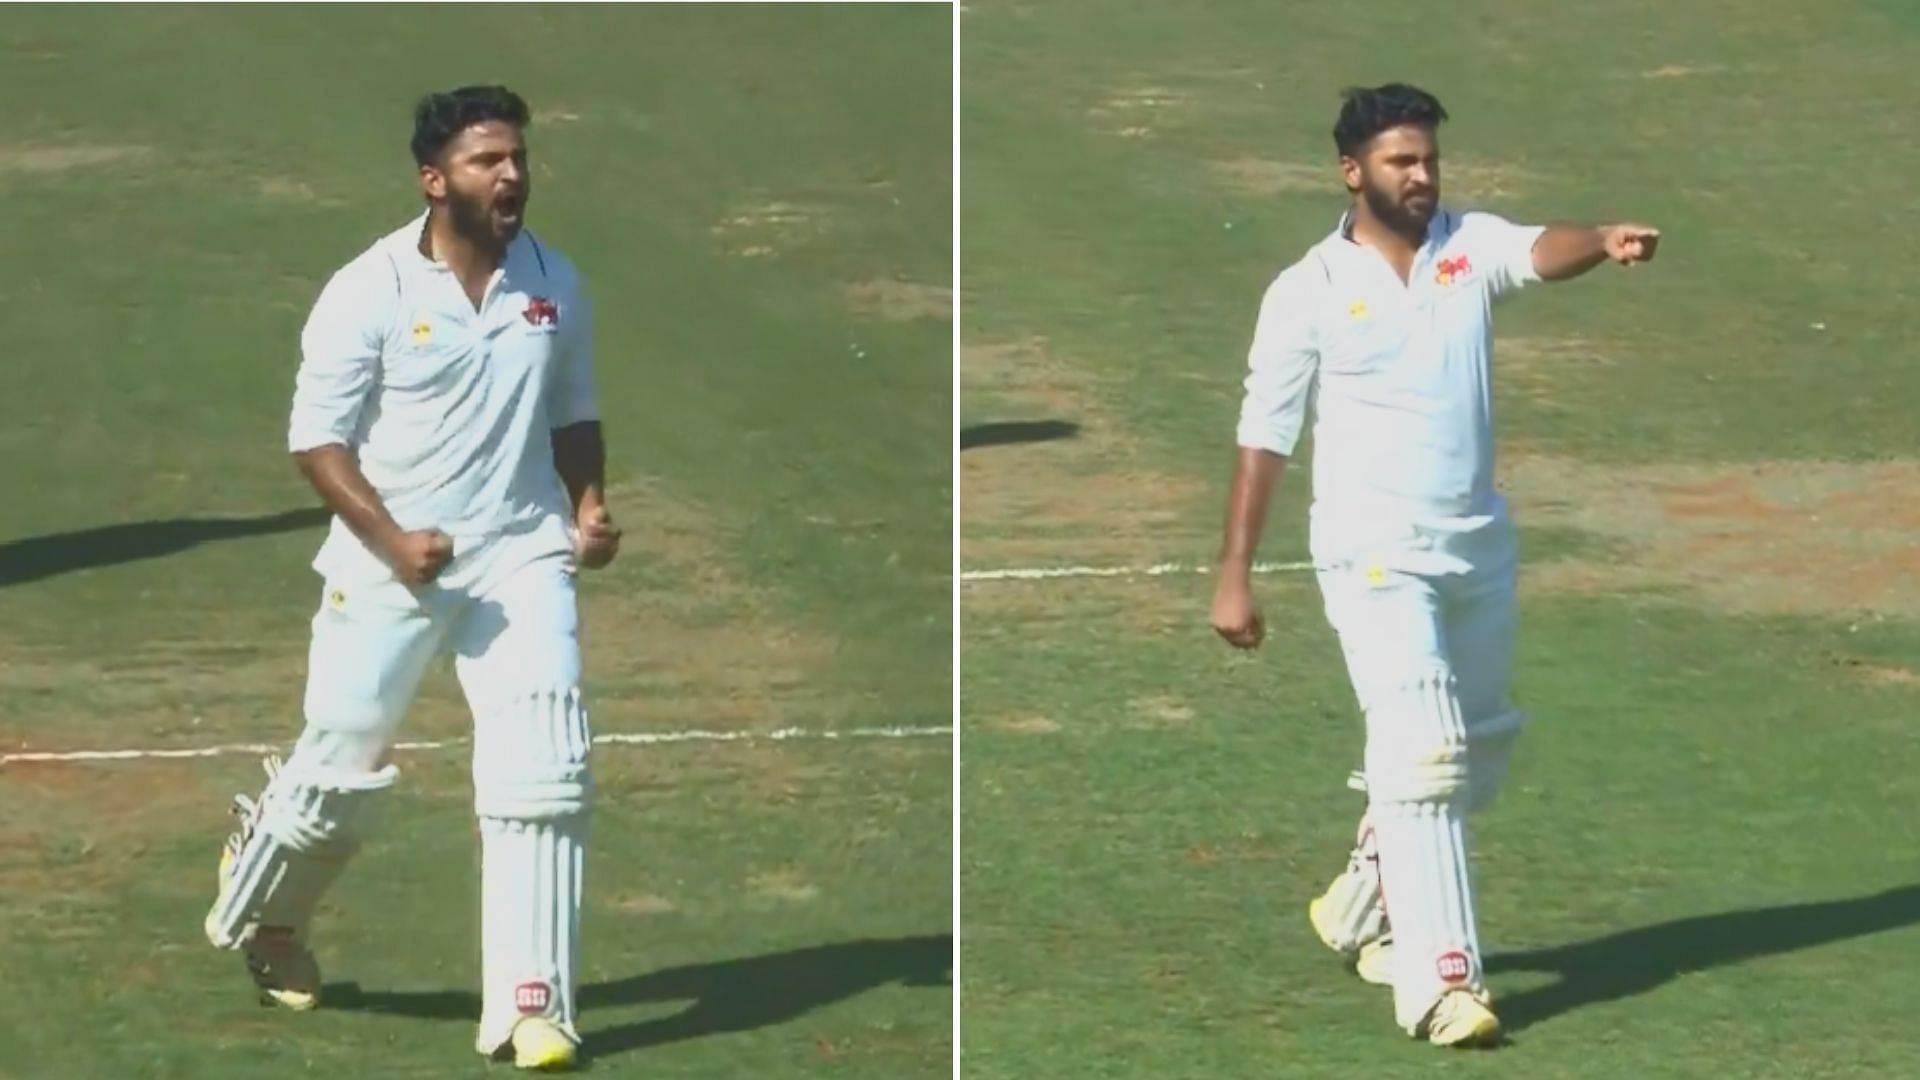 Snippets from Shardul Thakur